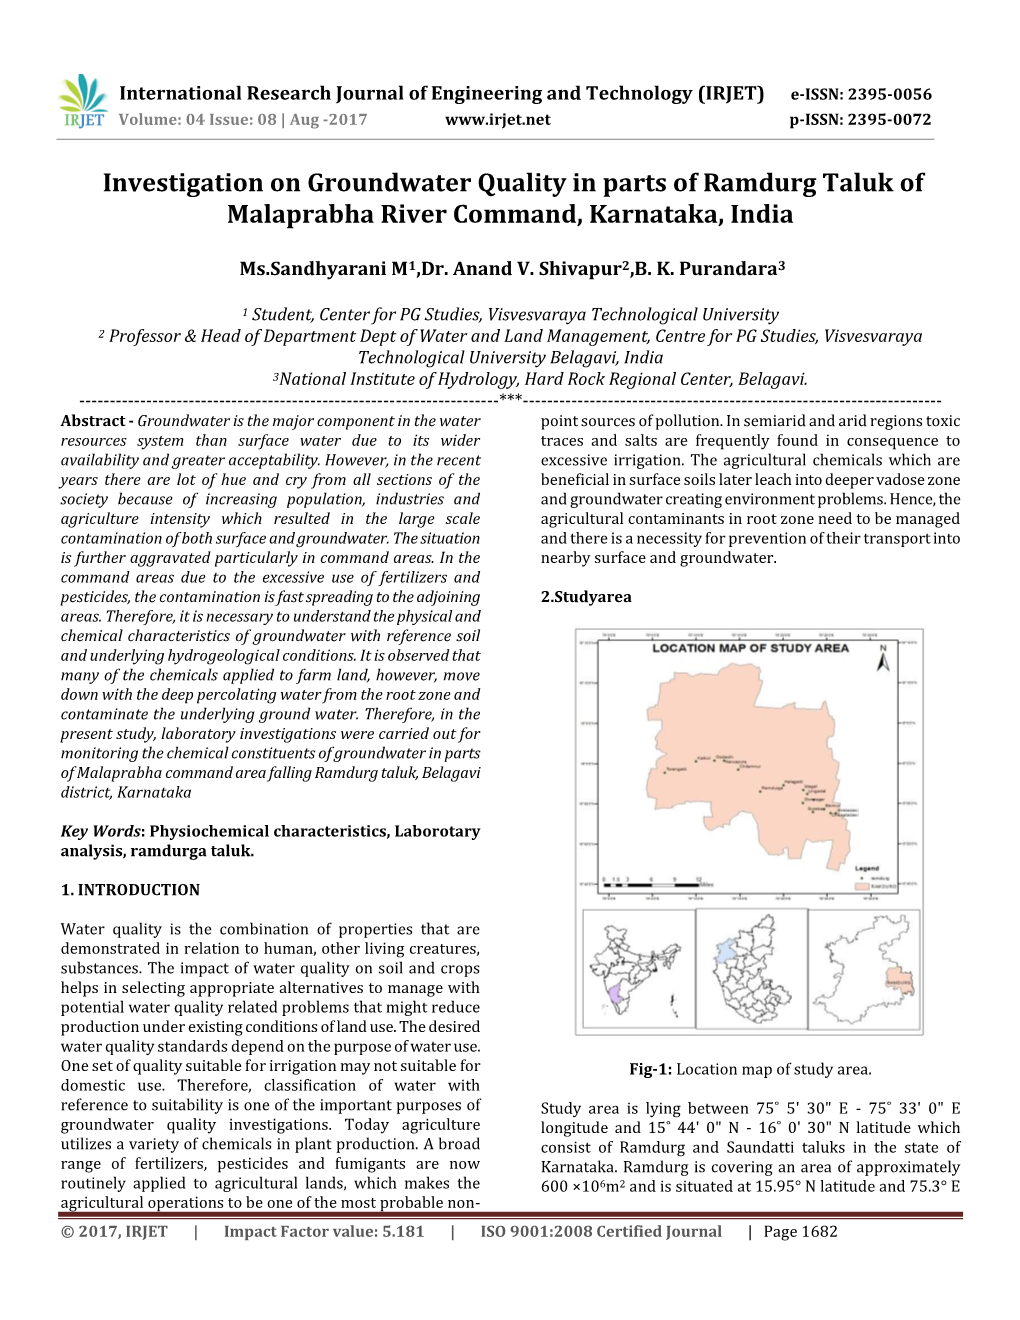 Investigation on Groundwater Quality in Parts of Ramdurg Taluk of Malaprabha River Command, Karnataka, India